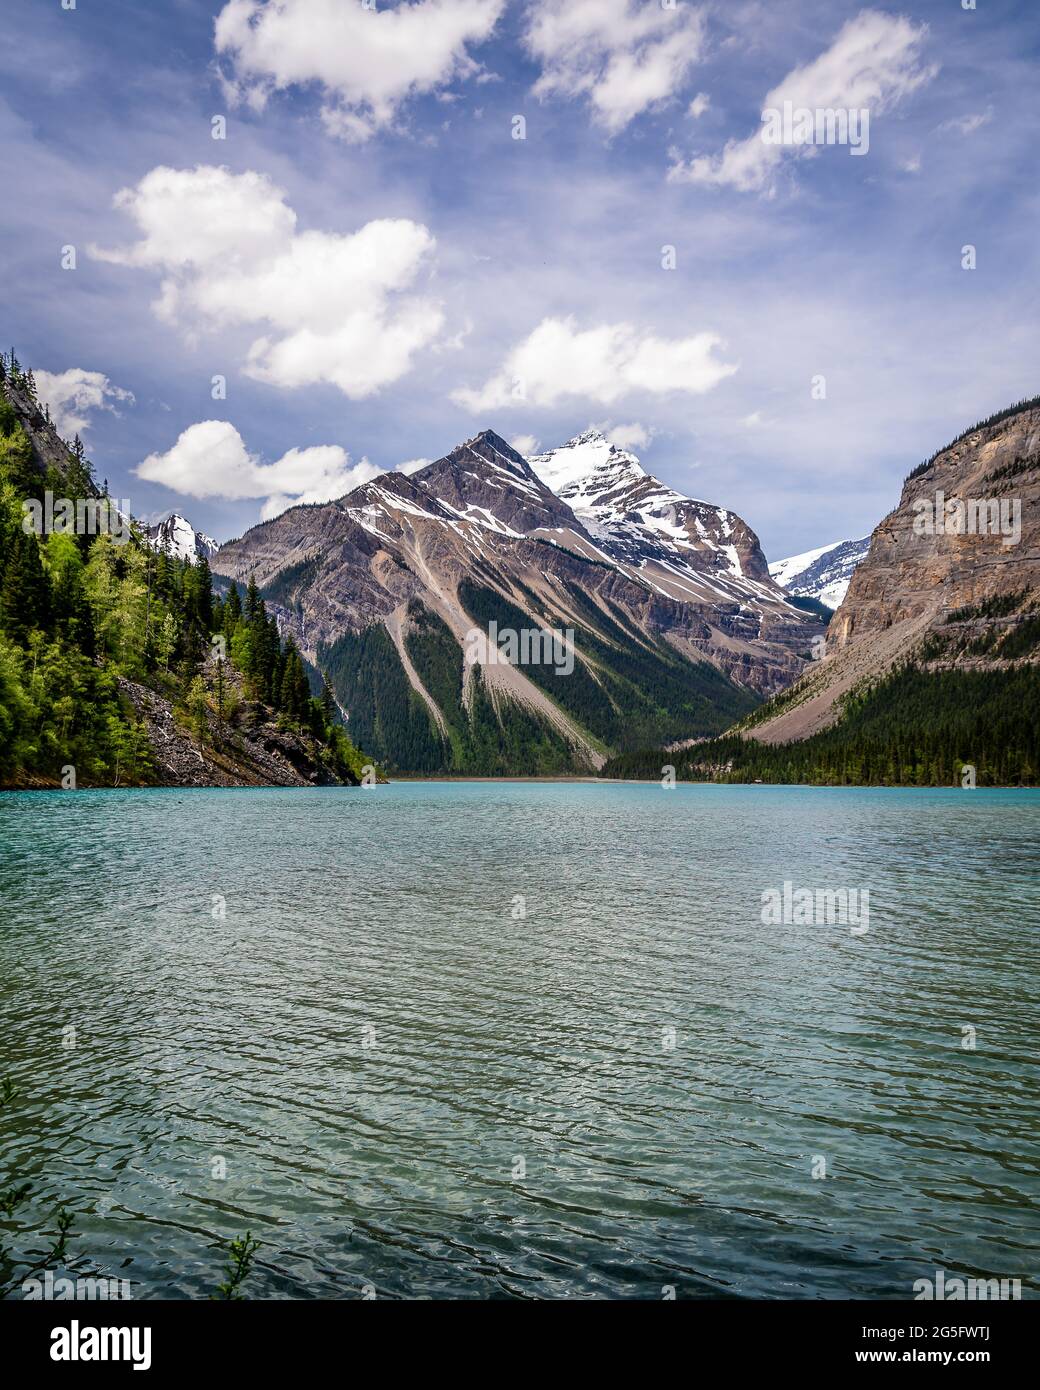 The turquoise water of Kinney Lake in Robson Provincial Park in the Canadian Rockies in British Columbia, Canada. Whitehorn Mountain and Cinnamon Peak Stock Photo